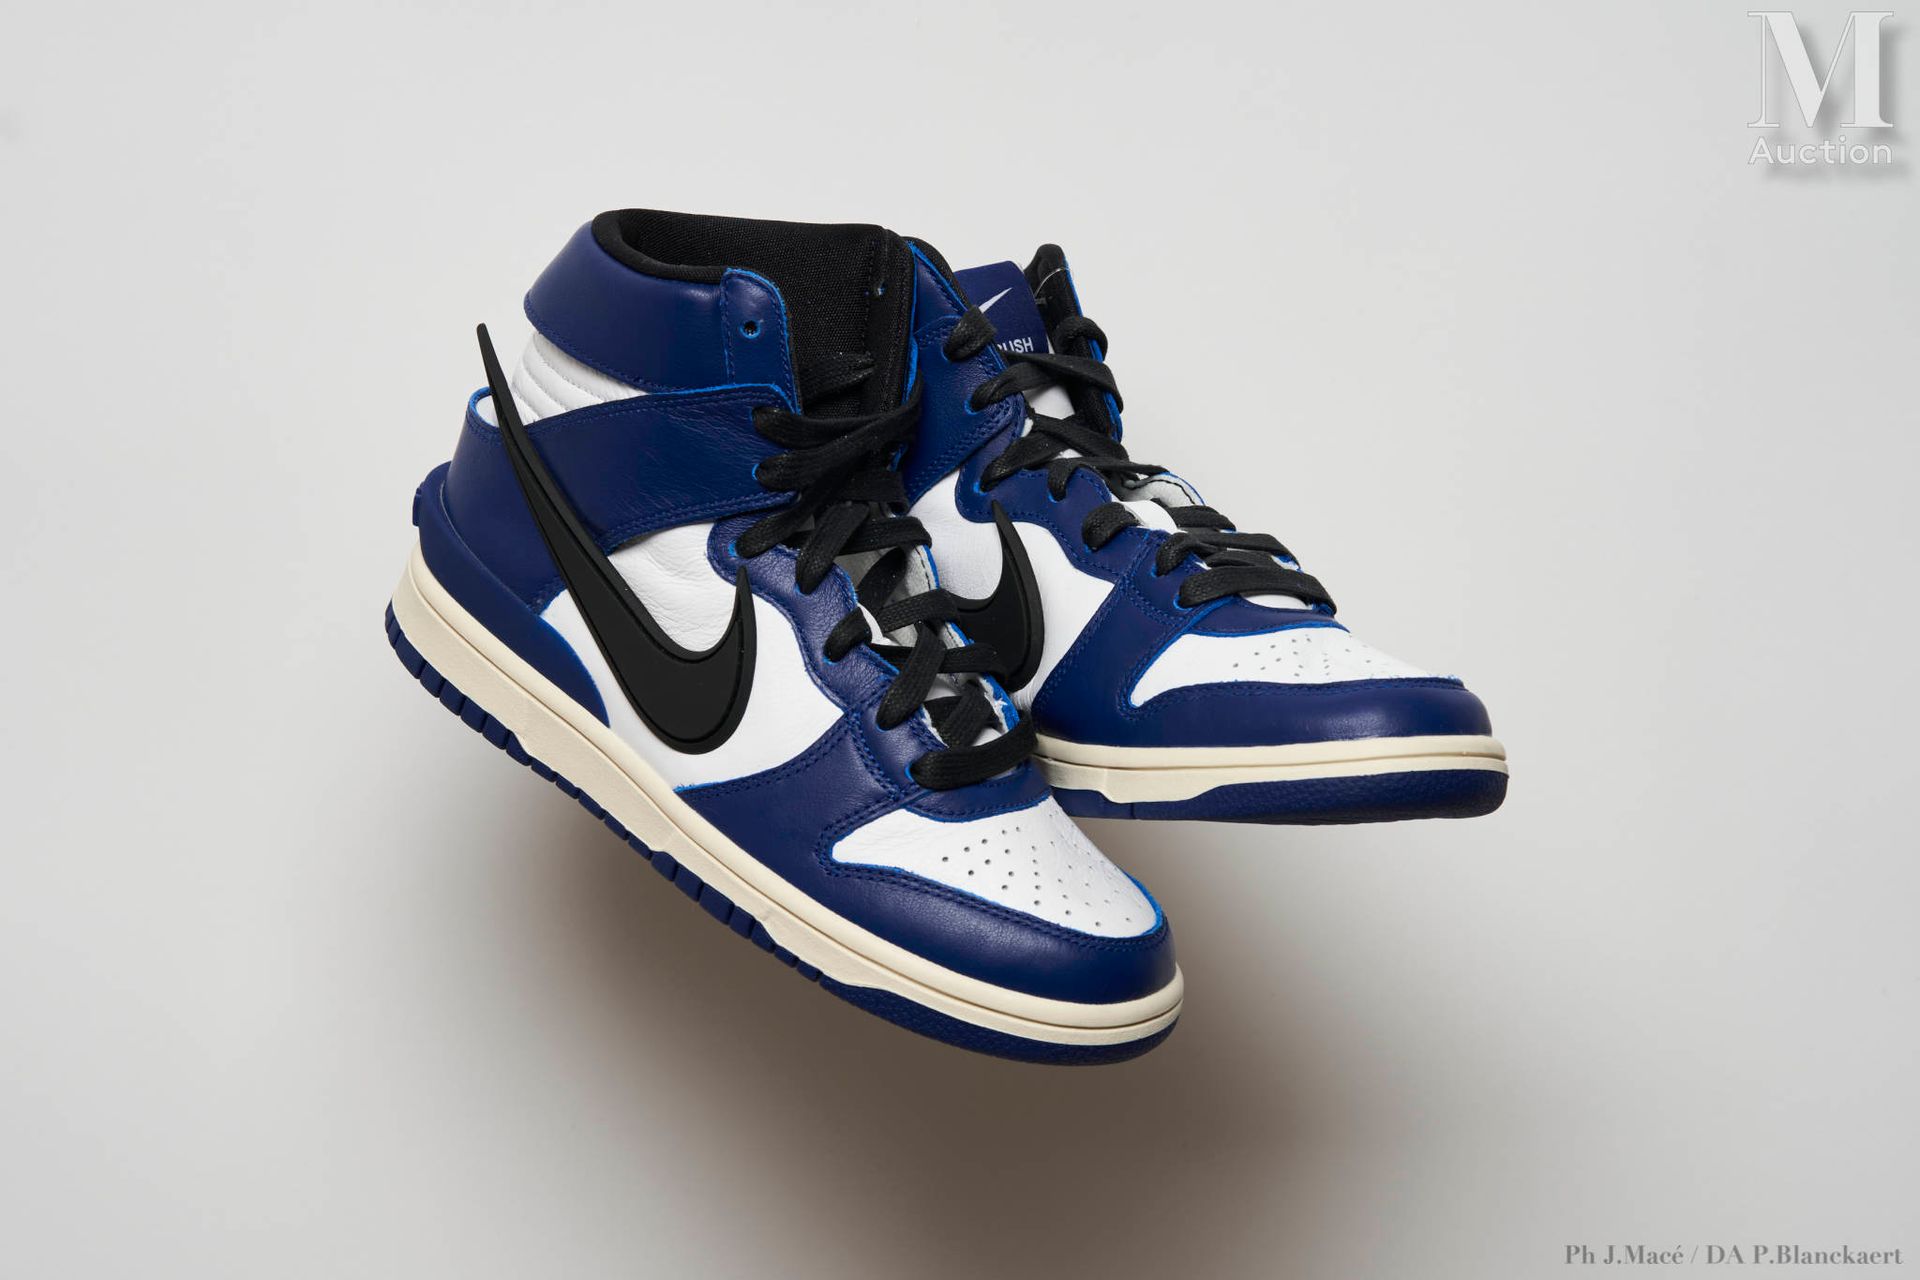 NIKE X AMBUSH PAIR OF "DUNK DEEP ROYAL" SNEAKERS
in royal blue and white leather&hellip;